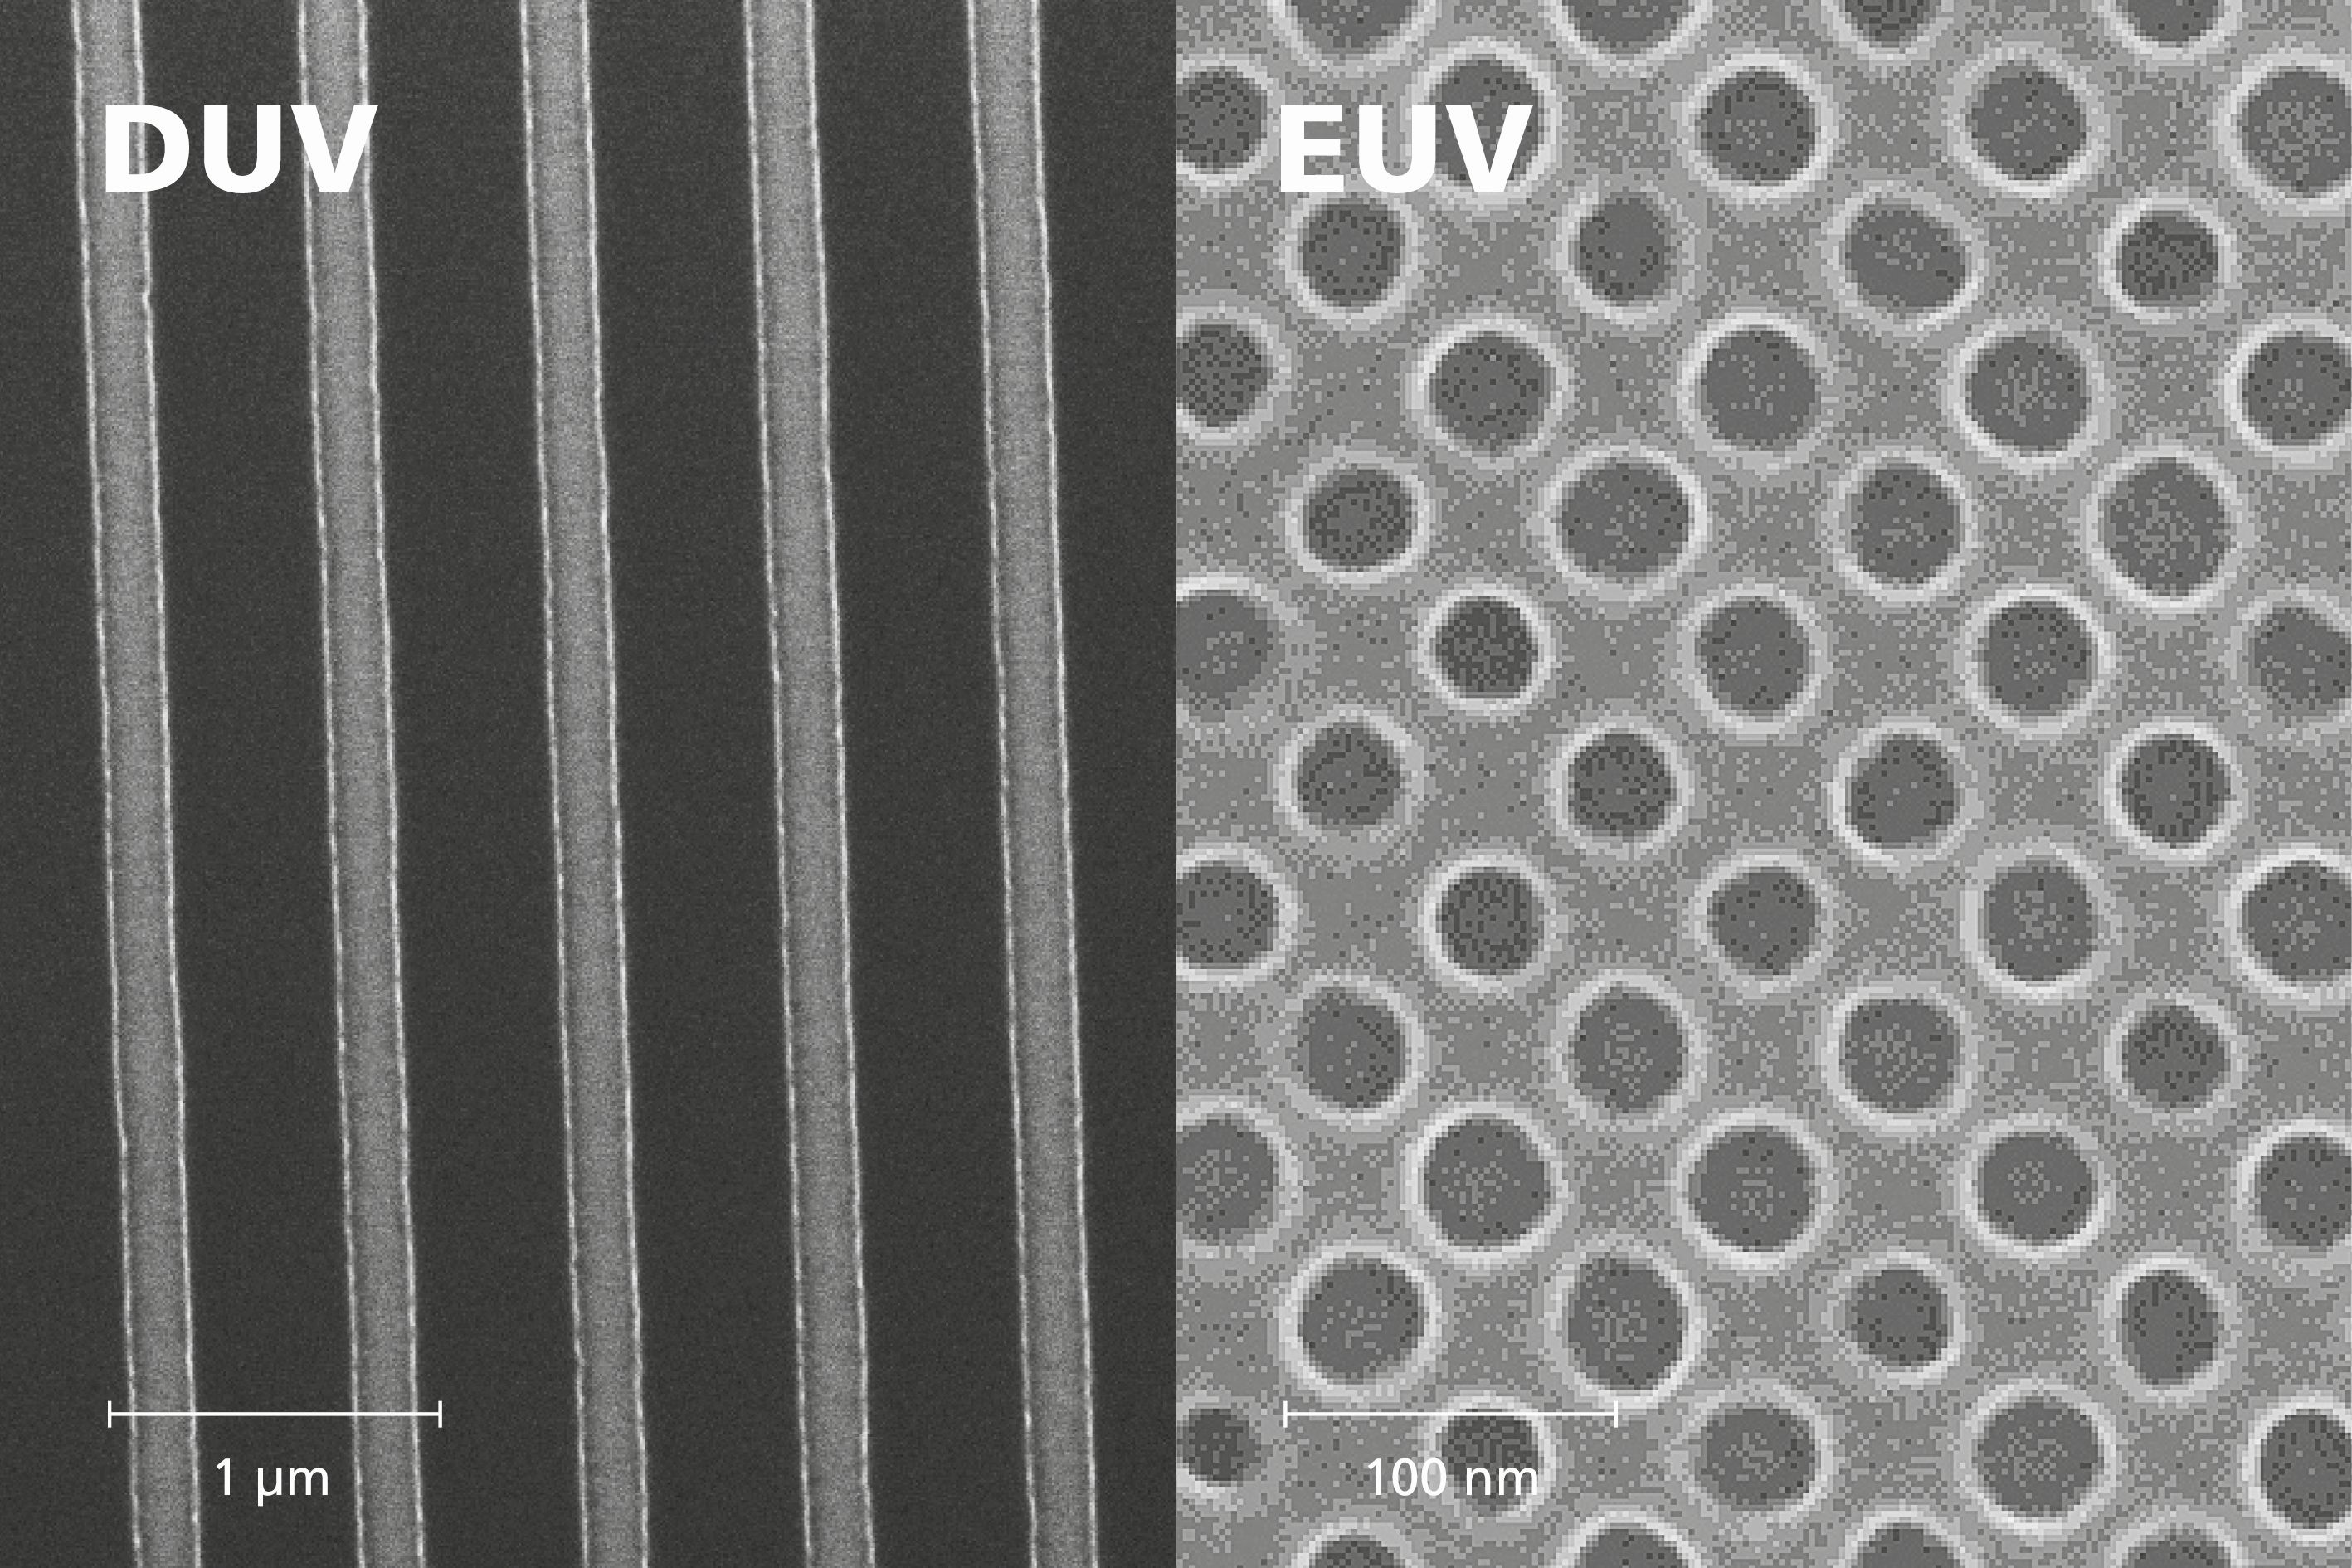 Nanostructures with 300 nm (left, DUV) and 28 nm (right, EUV) half-pitch (HP) generated with laboratory-based EUV source.